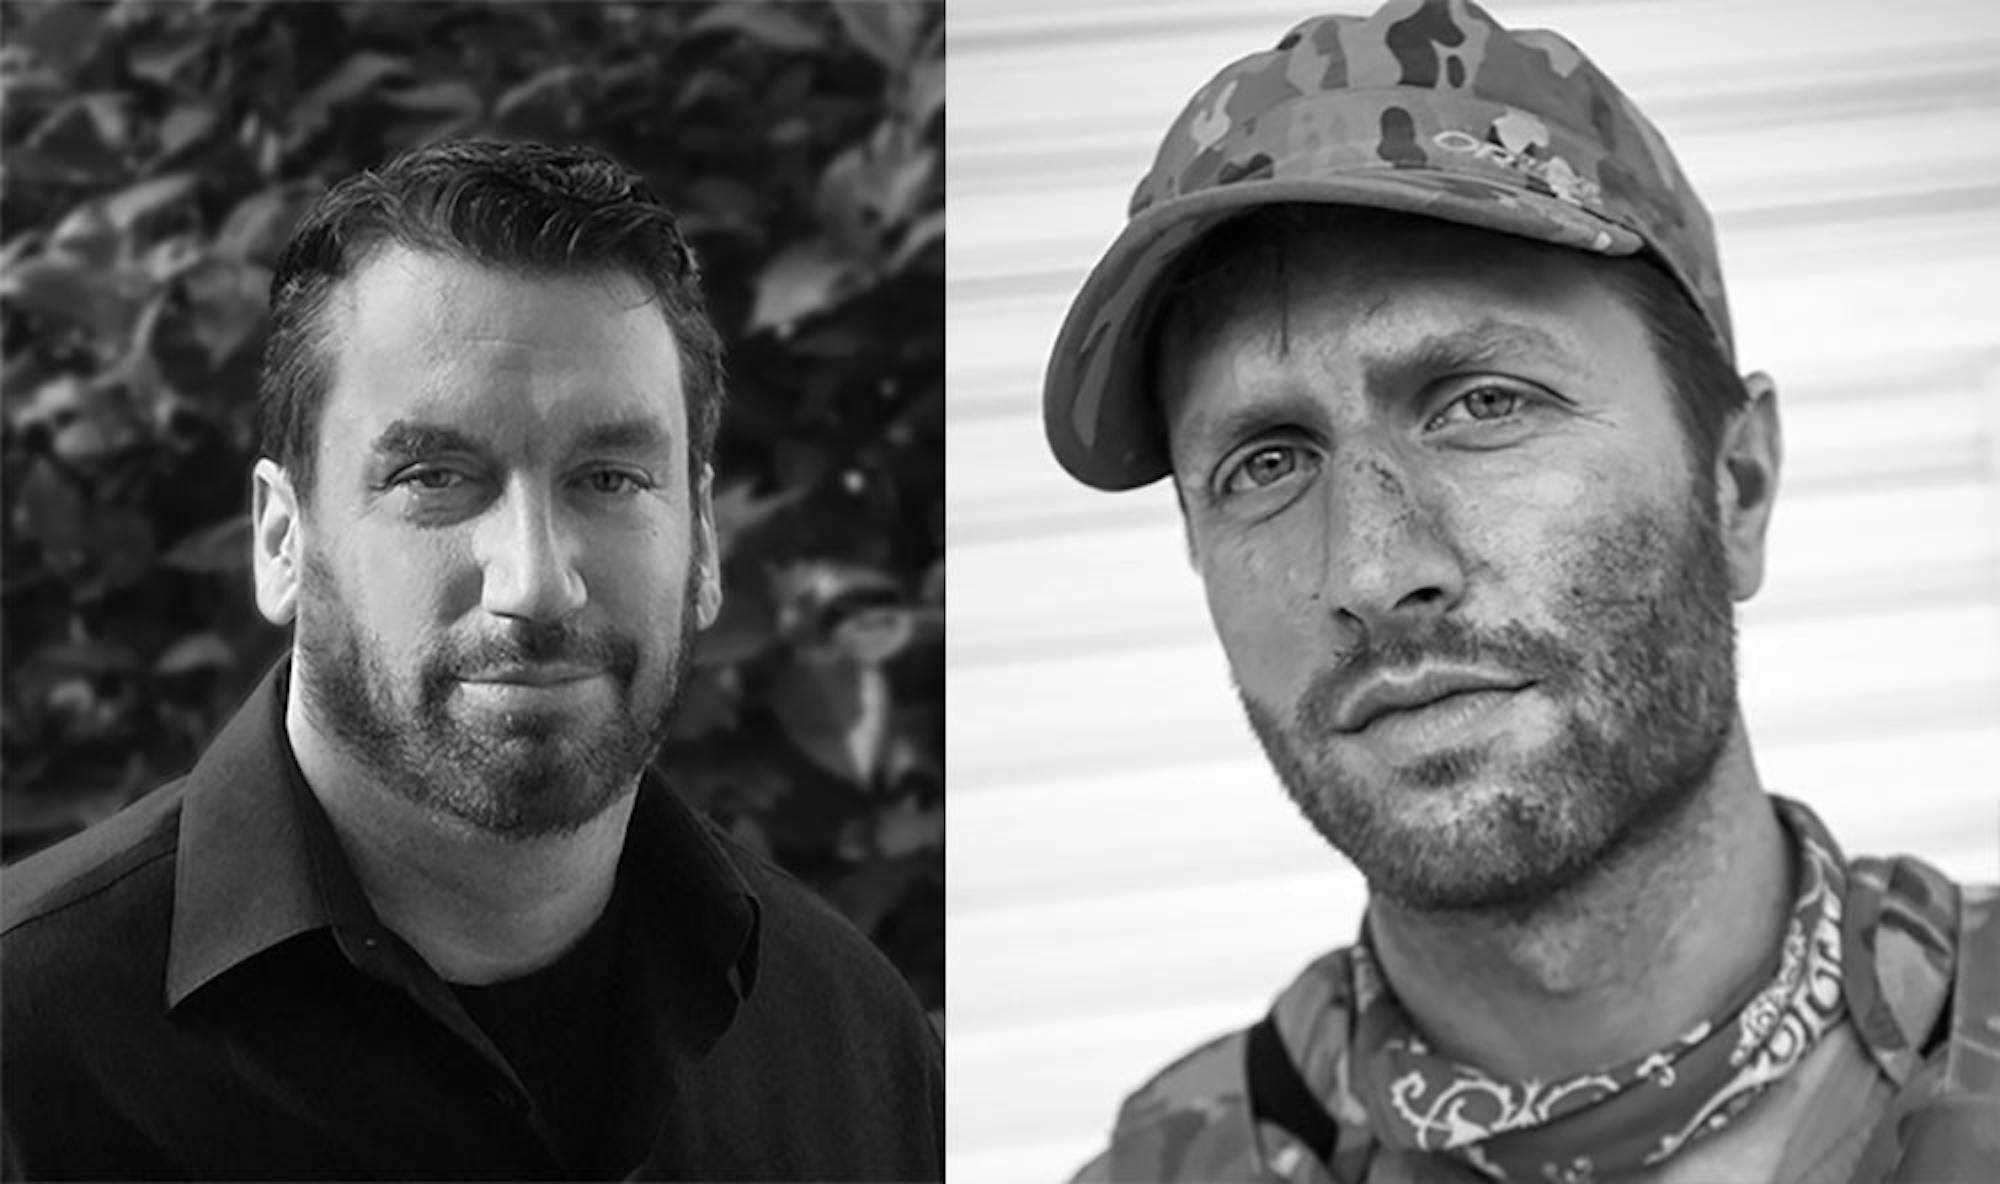 Tom McArdle '91 and Matt Heineman '05 were both up for Oscar nominations this past cycle.